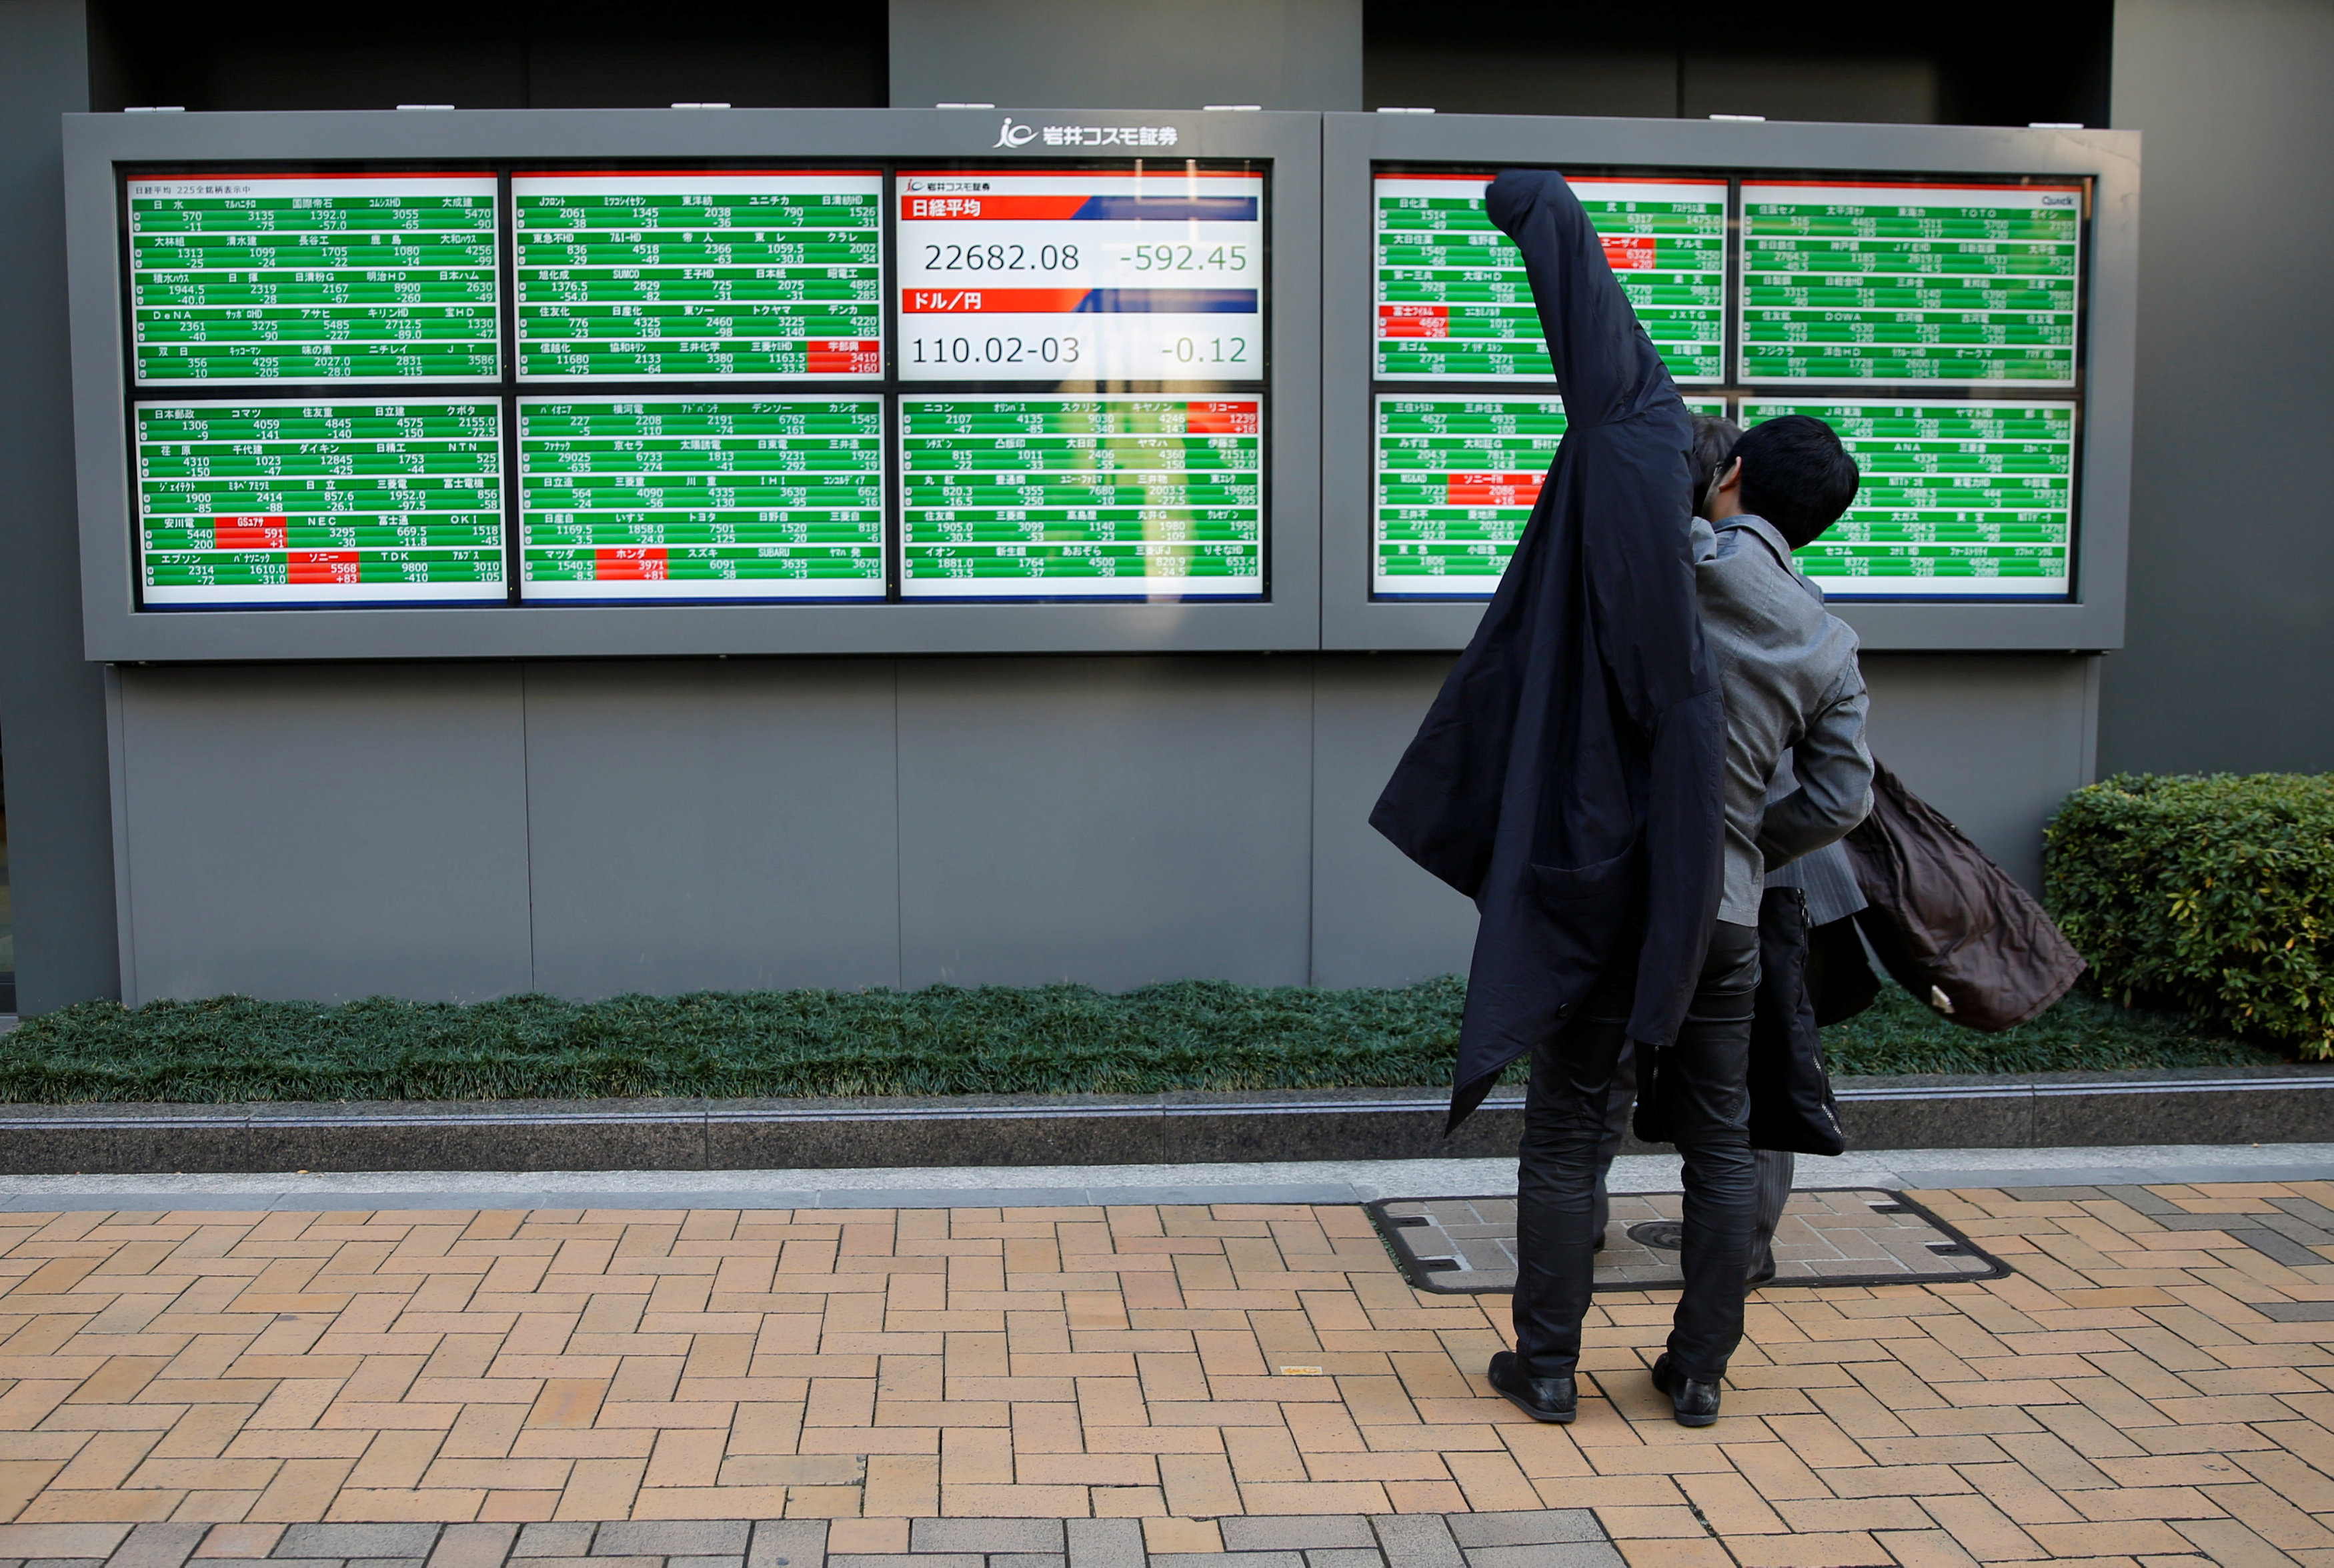 Asian shares mostly firmer, dollar loses early edge